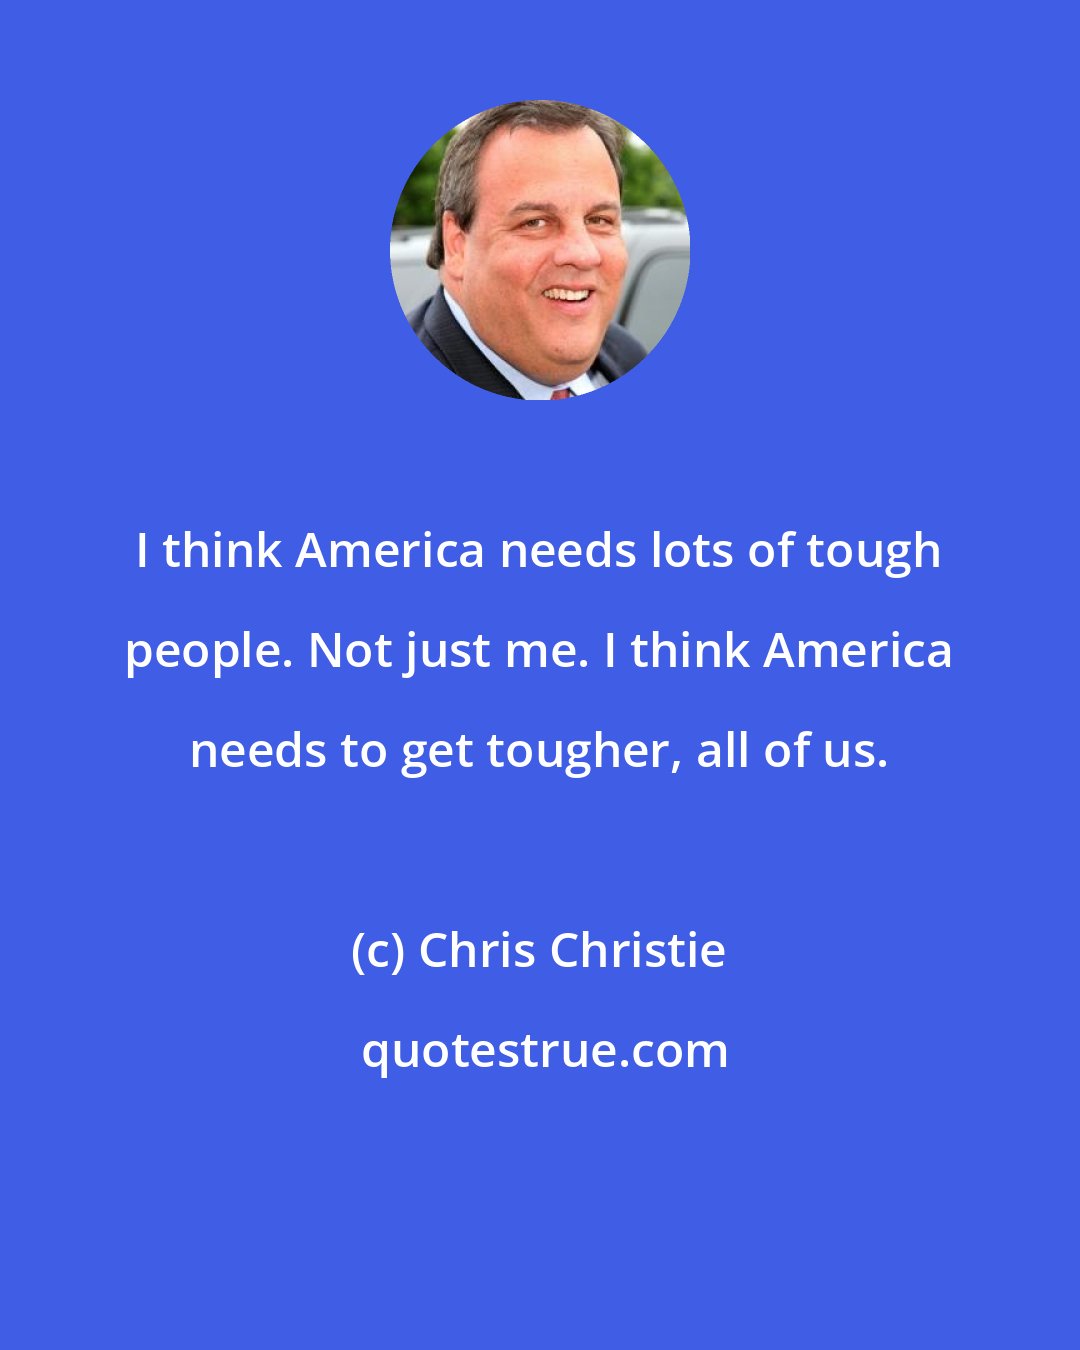 Chris Christie: I think America needs lots of tough people. Not just me. I think America needs to get tougher, all of us.